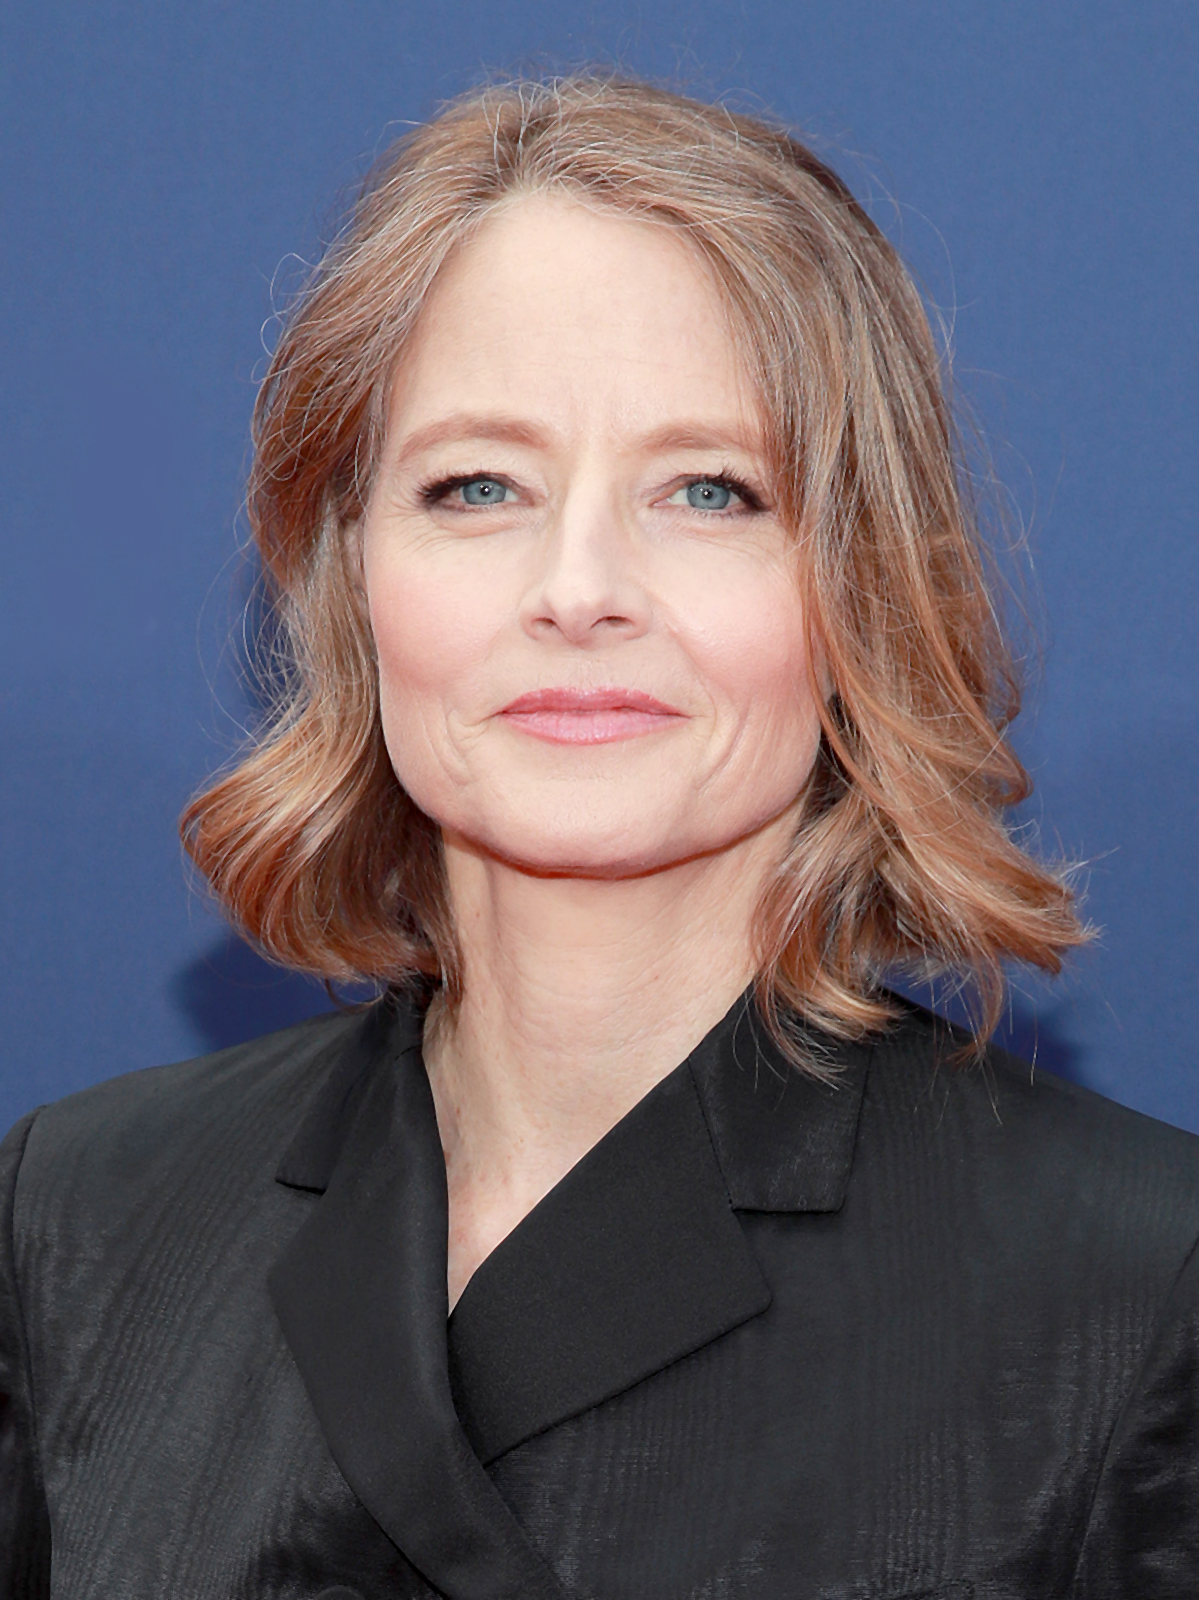 Jodie Foster earned Supporting Actress Oscar nom decades after first